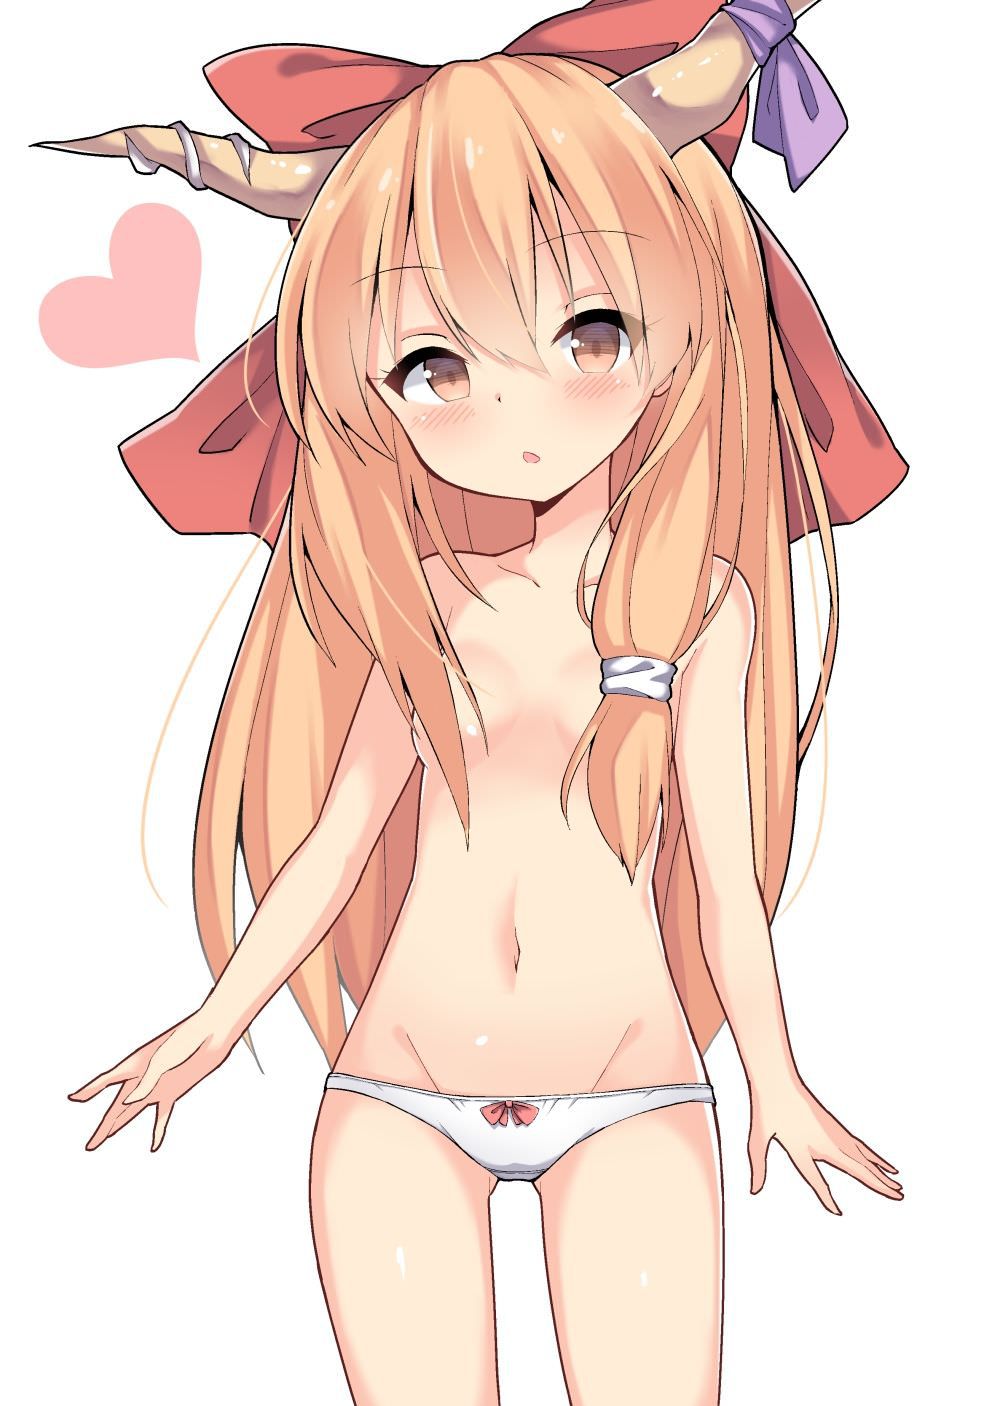 [Loli navel] charm of the navel of the soft-looking belly of Lori Girl! I tried to collect naughty images of the belly and the navel of Lori girl to enjoy the groin and the navel! 20